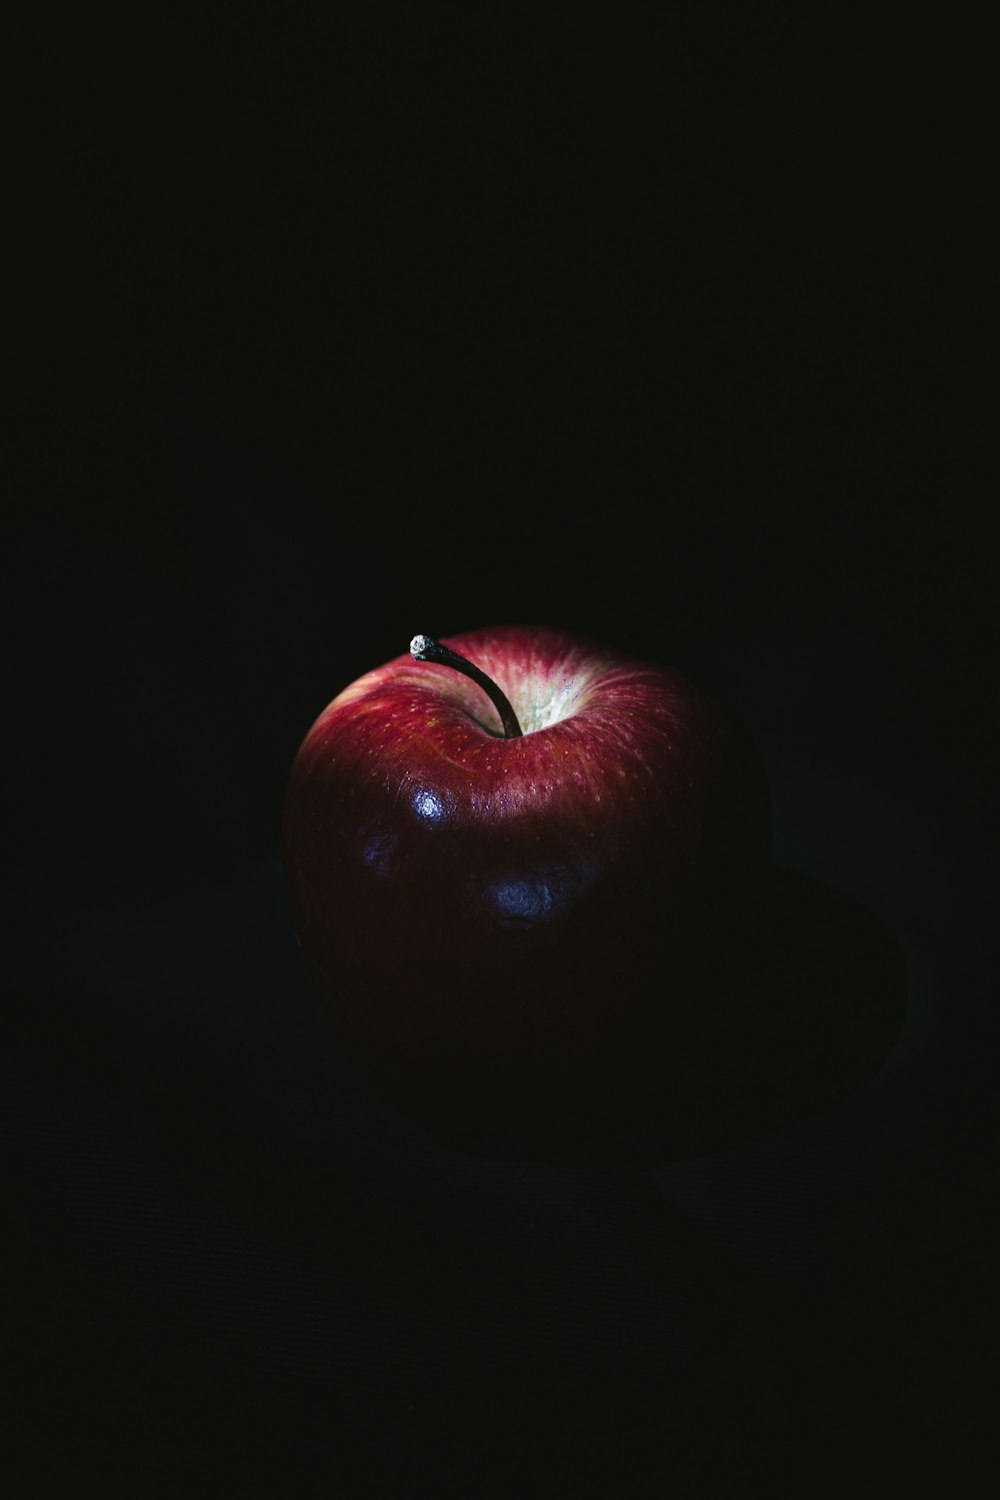 Red Apple Pictures | Download Free Images on Unsplash